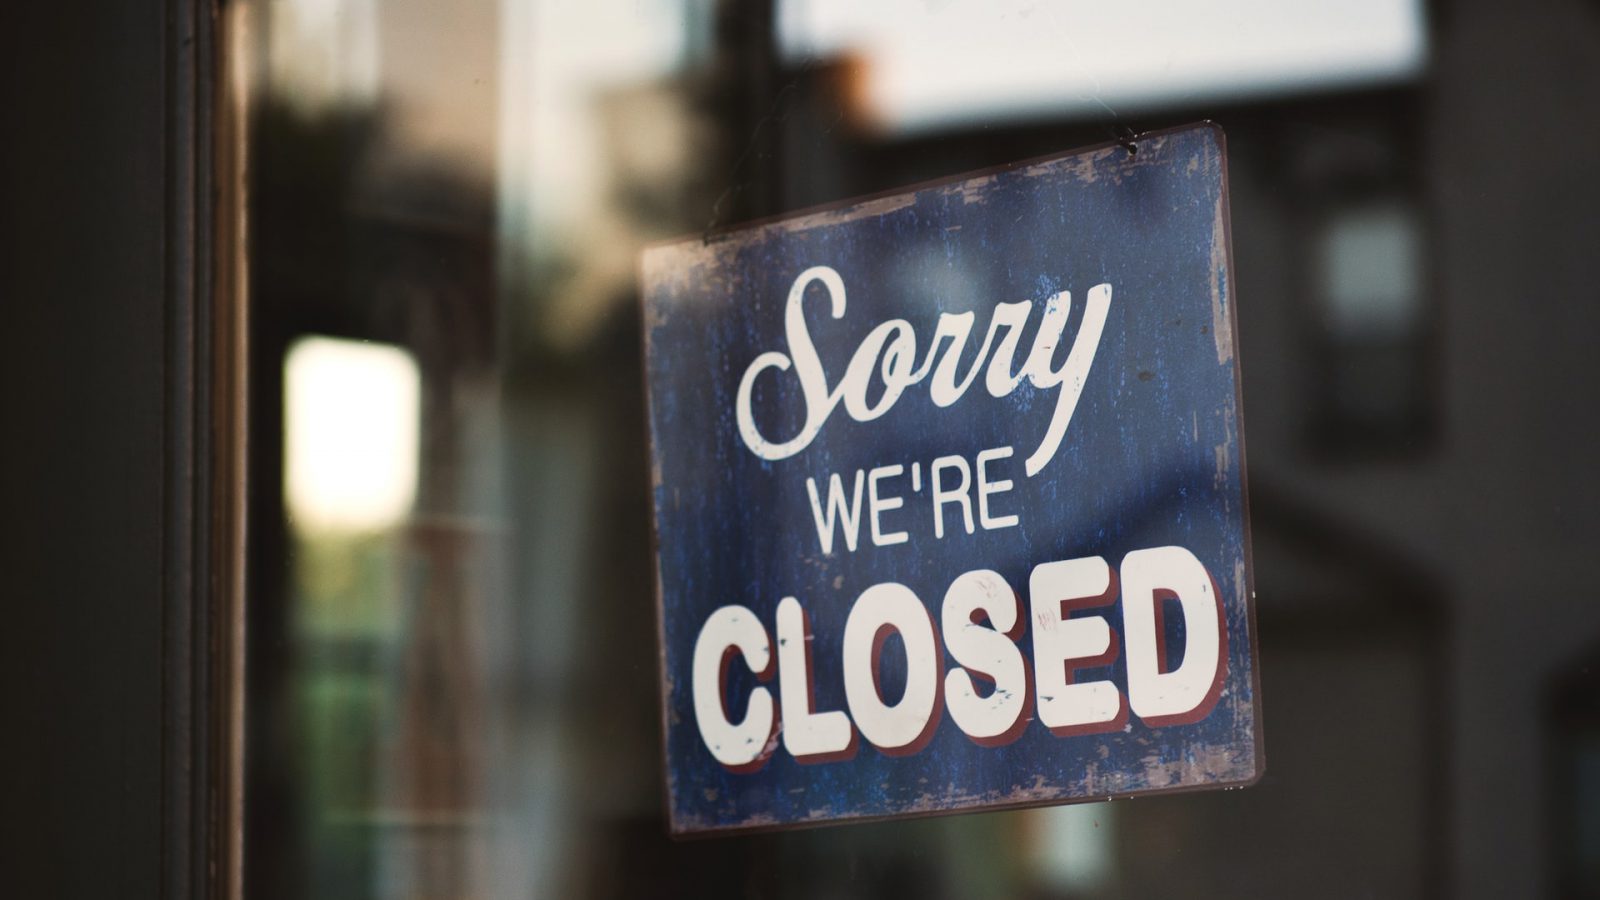 A sign reading "Sorry, We're Closed" in a business window